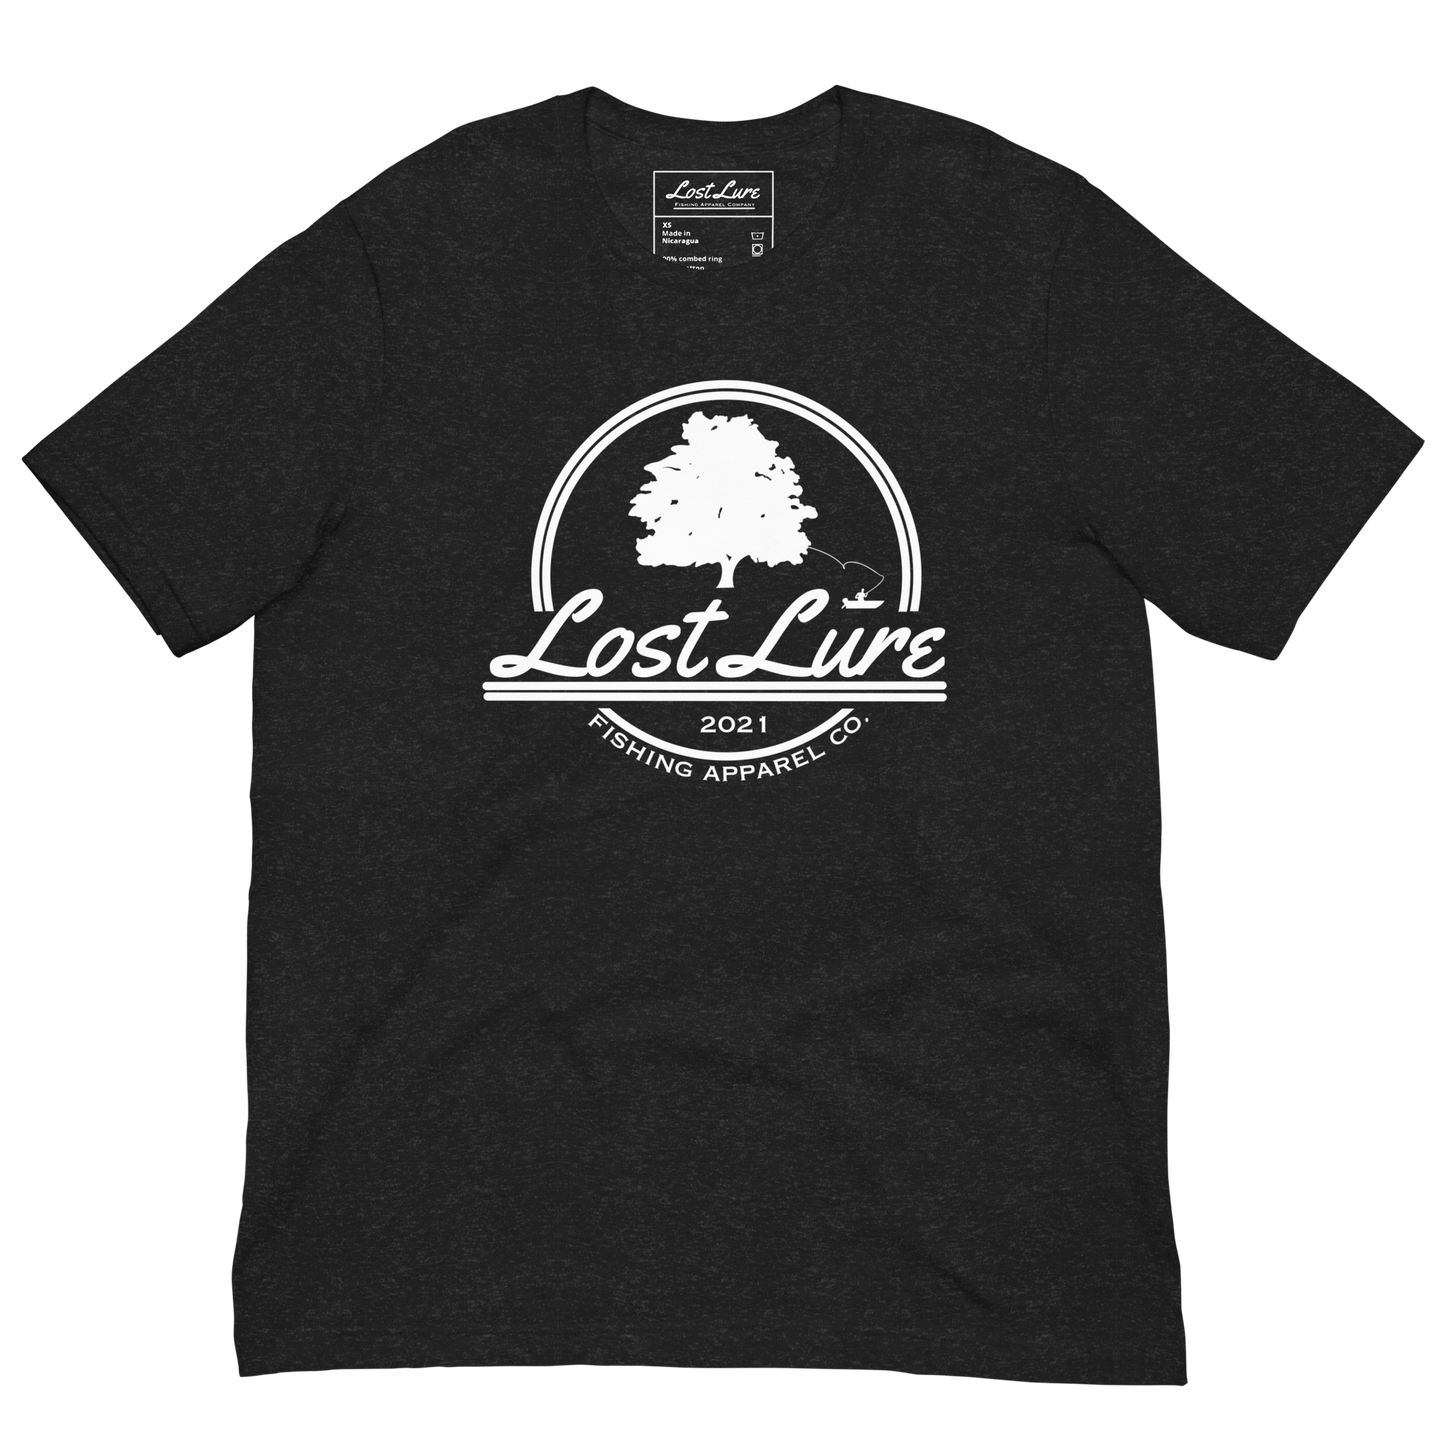 Dark grey lost lure fishing shirt. Funny lost lure logo with fisherman snagged in tree 